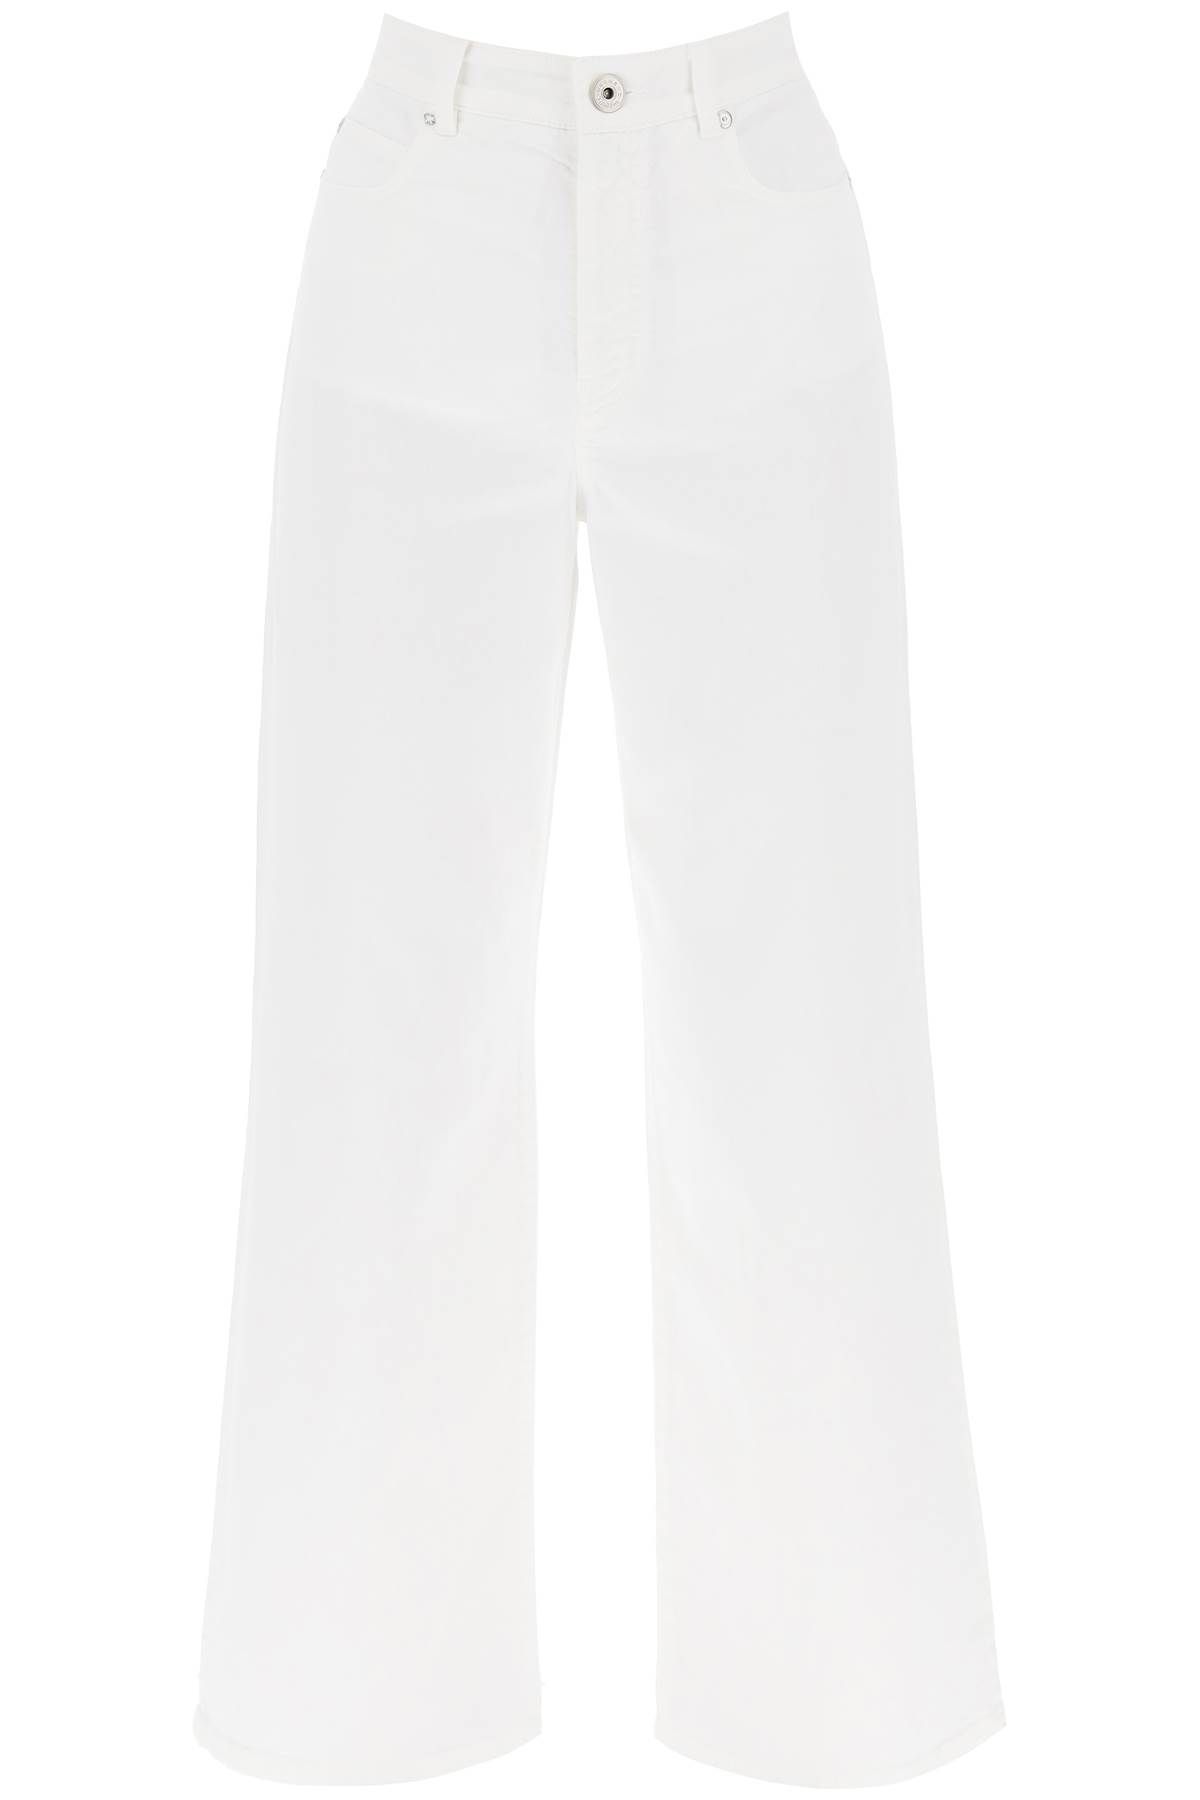 Weekend Max Mara Cotton Cropped Pants In White